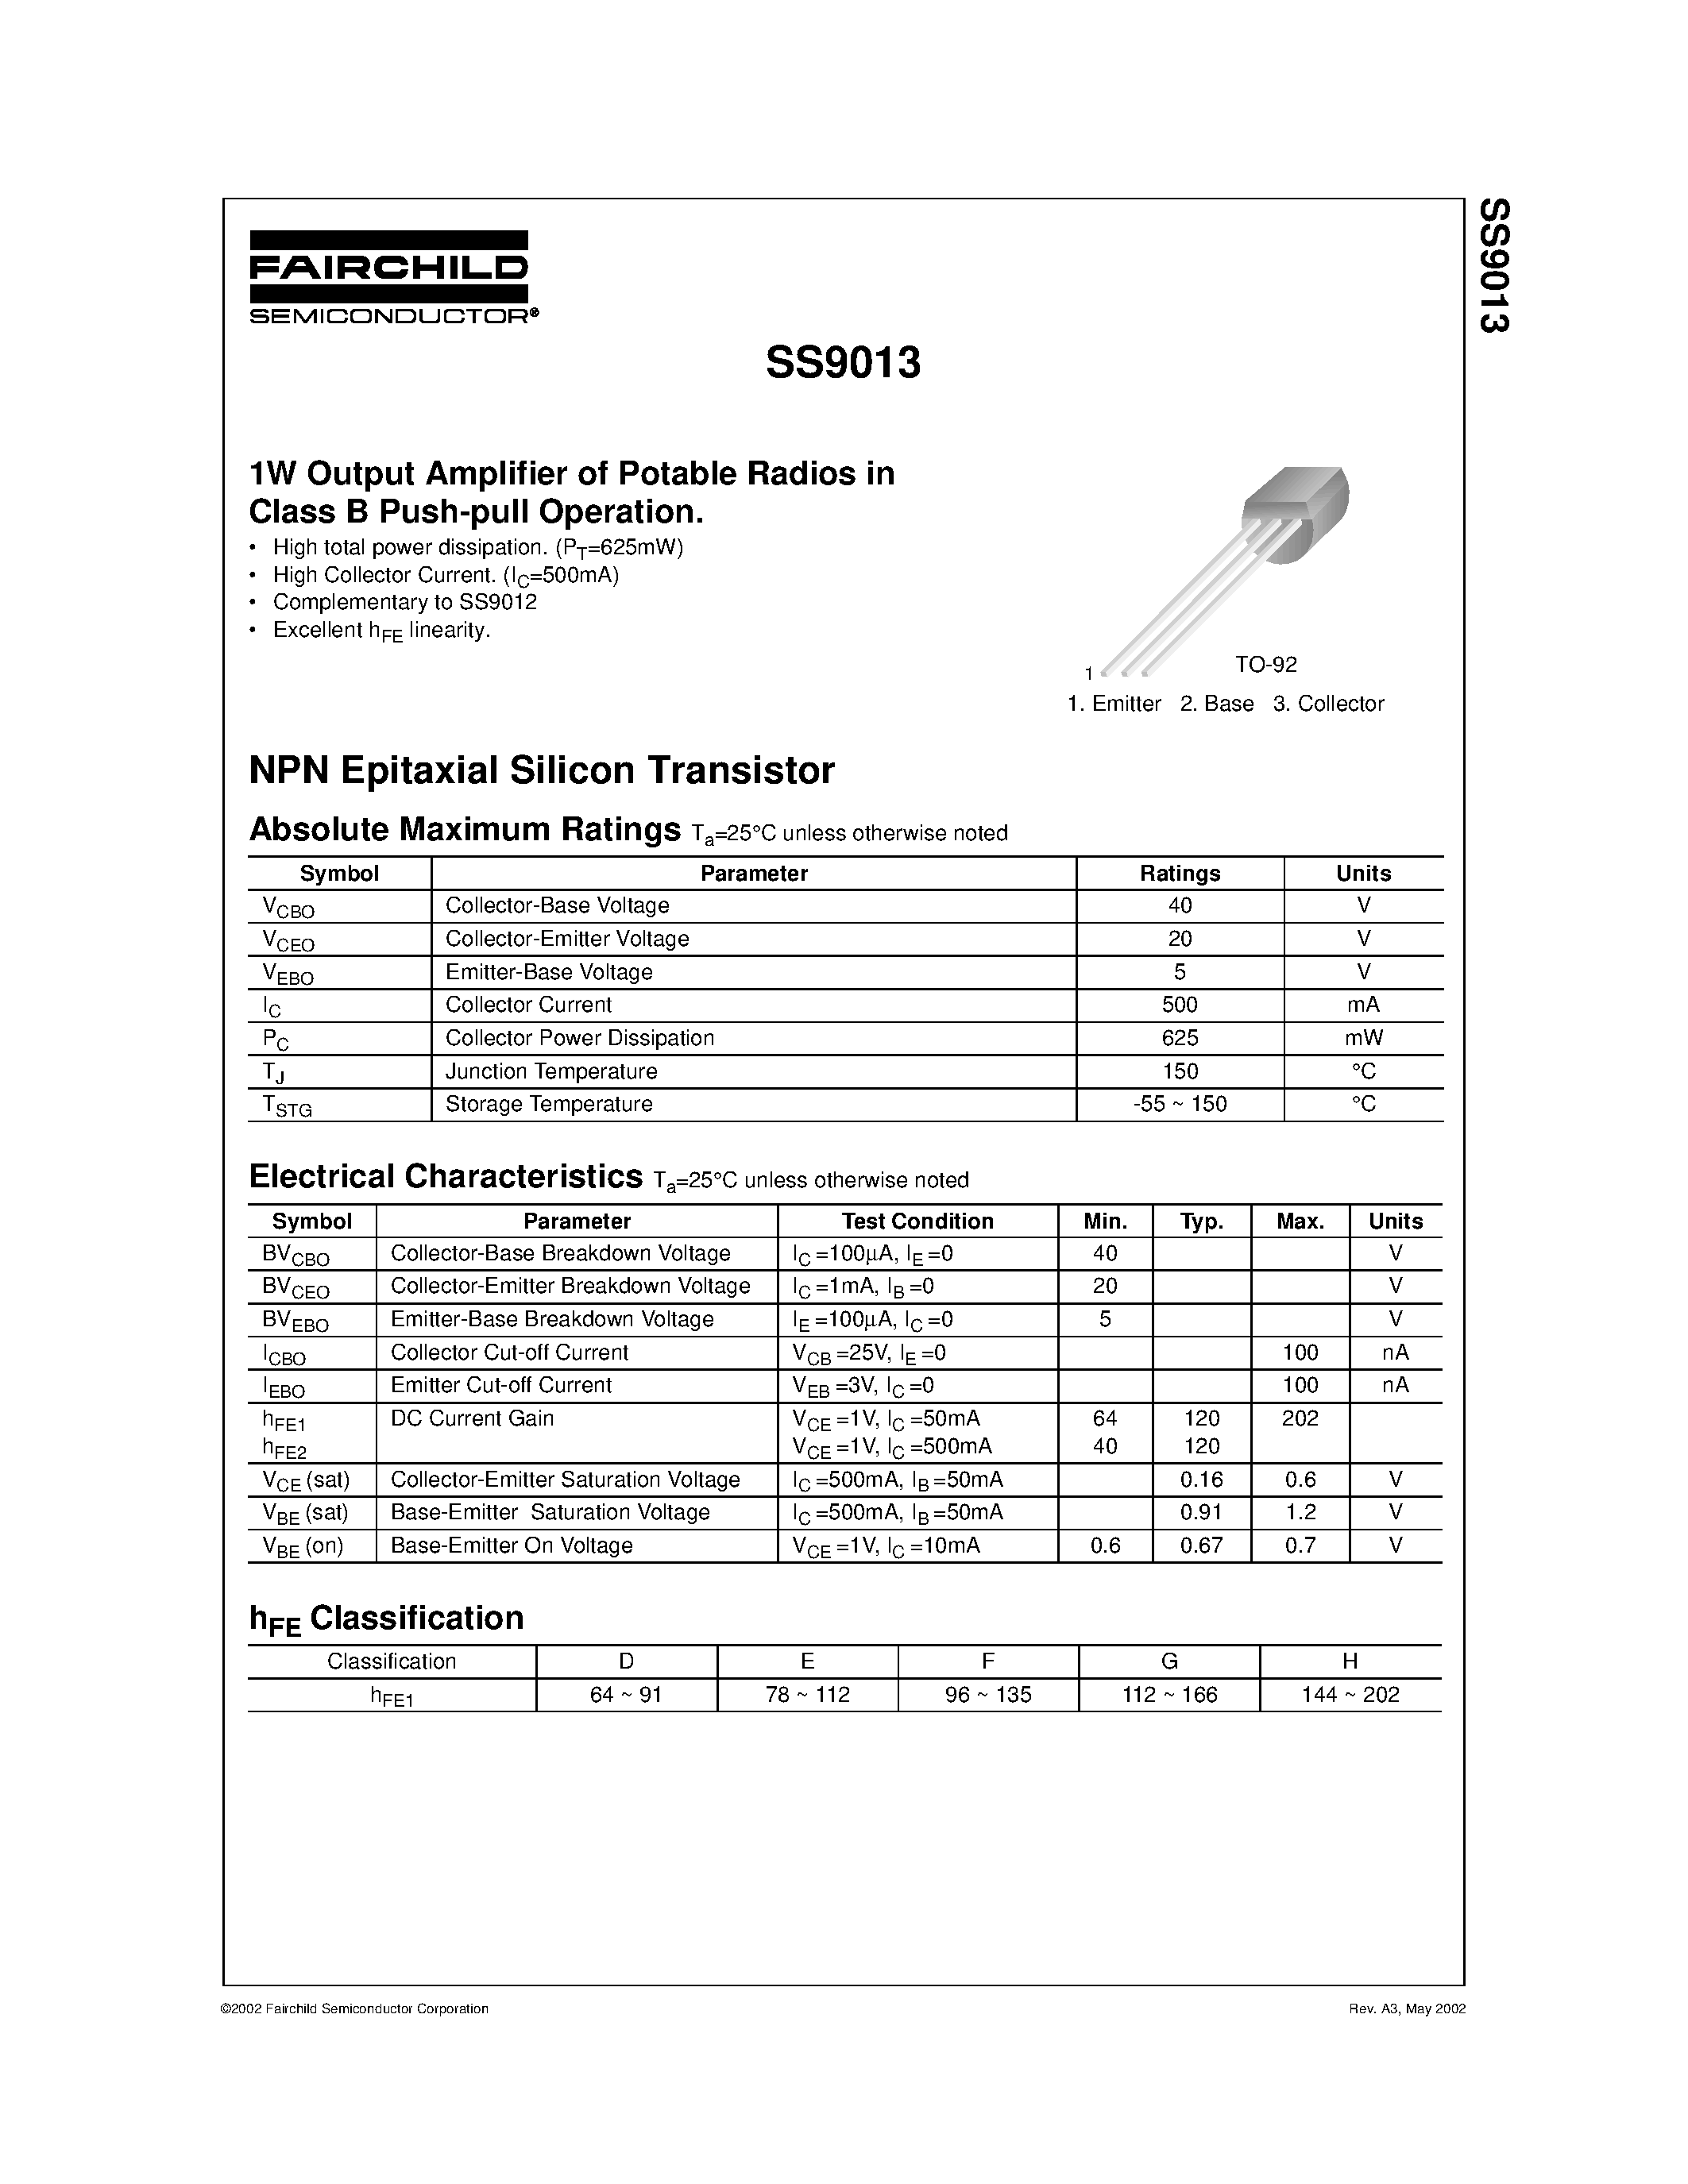 Datasheet S9013 - 1W Output Amplifier of Potable Radios in Class B Push-pull Operation. page 1